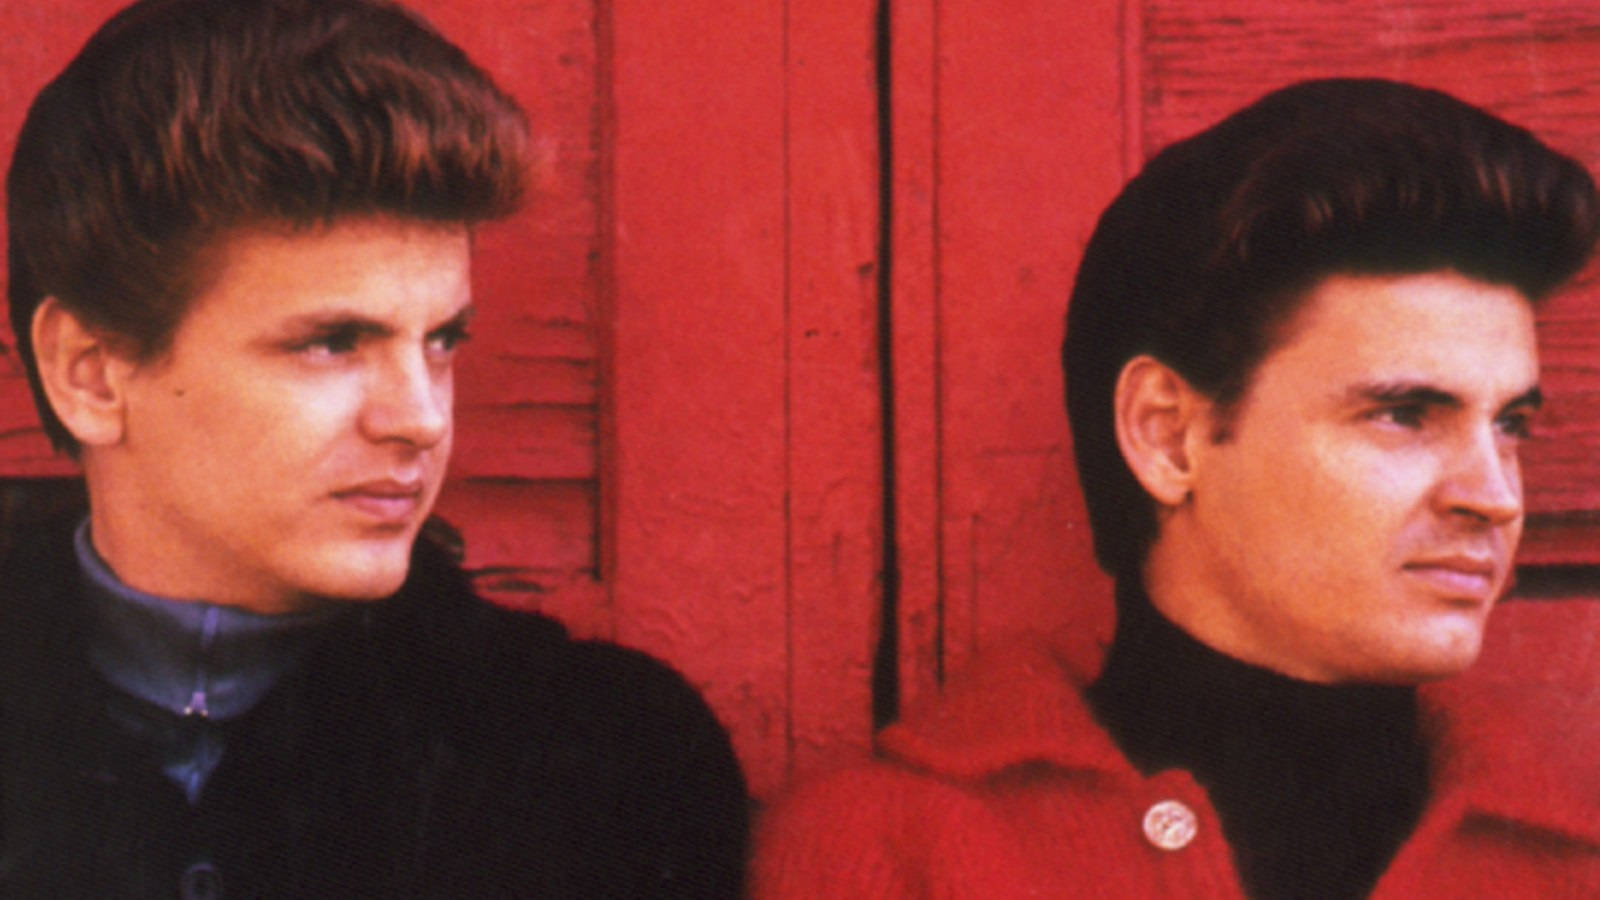 Rock Duo Everly Brothers 1965 Close Up Shot Wallpaper